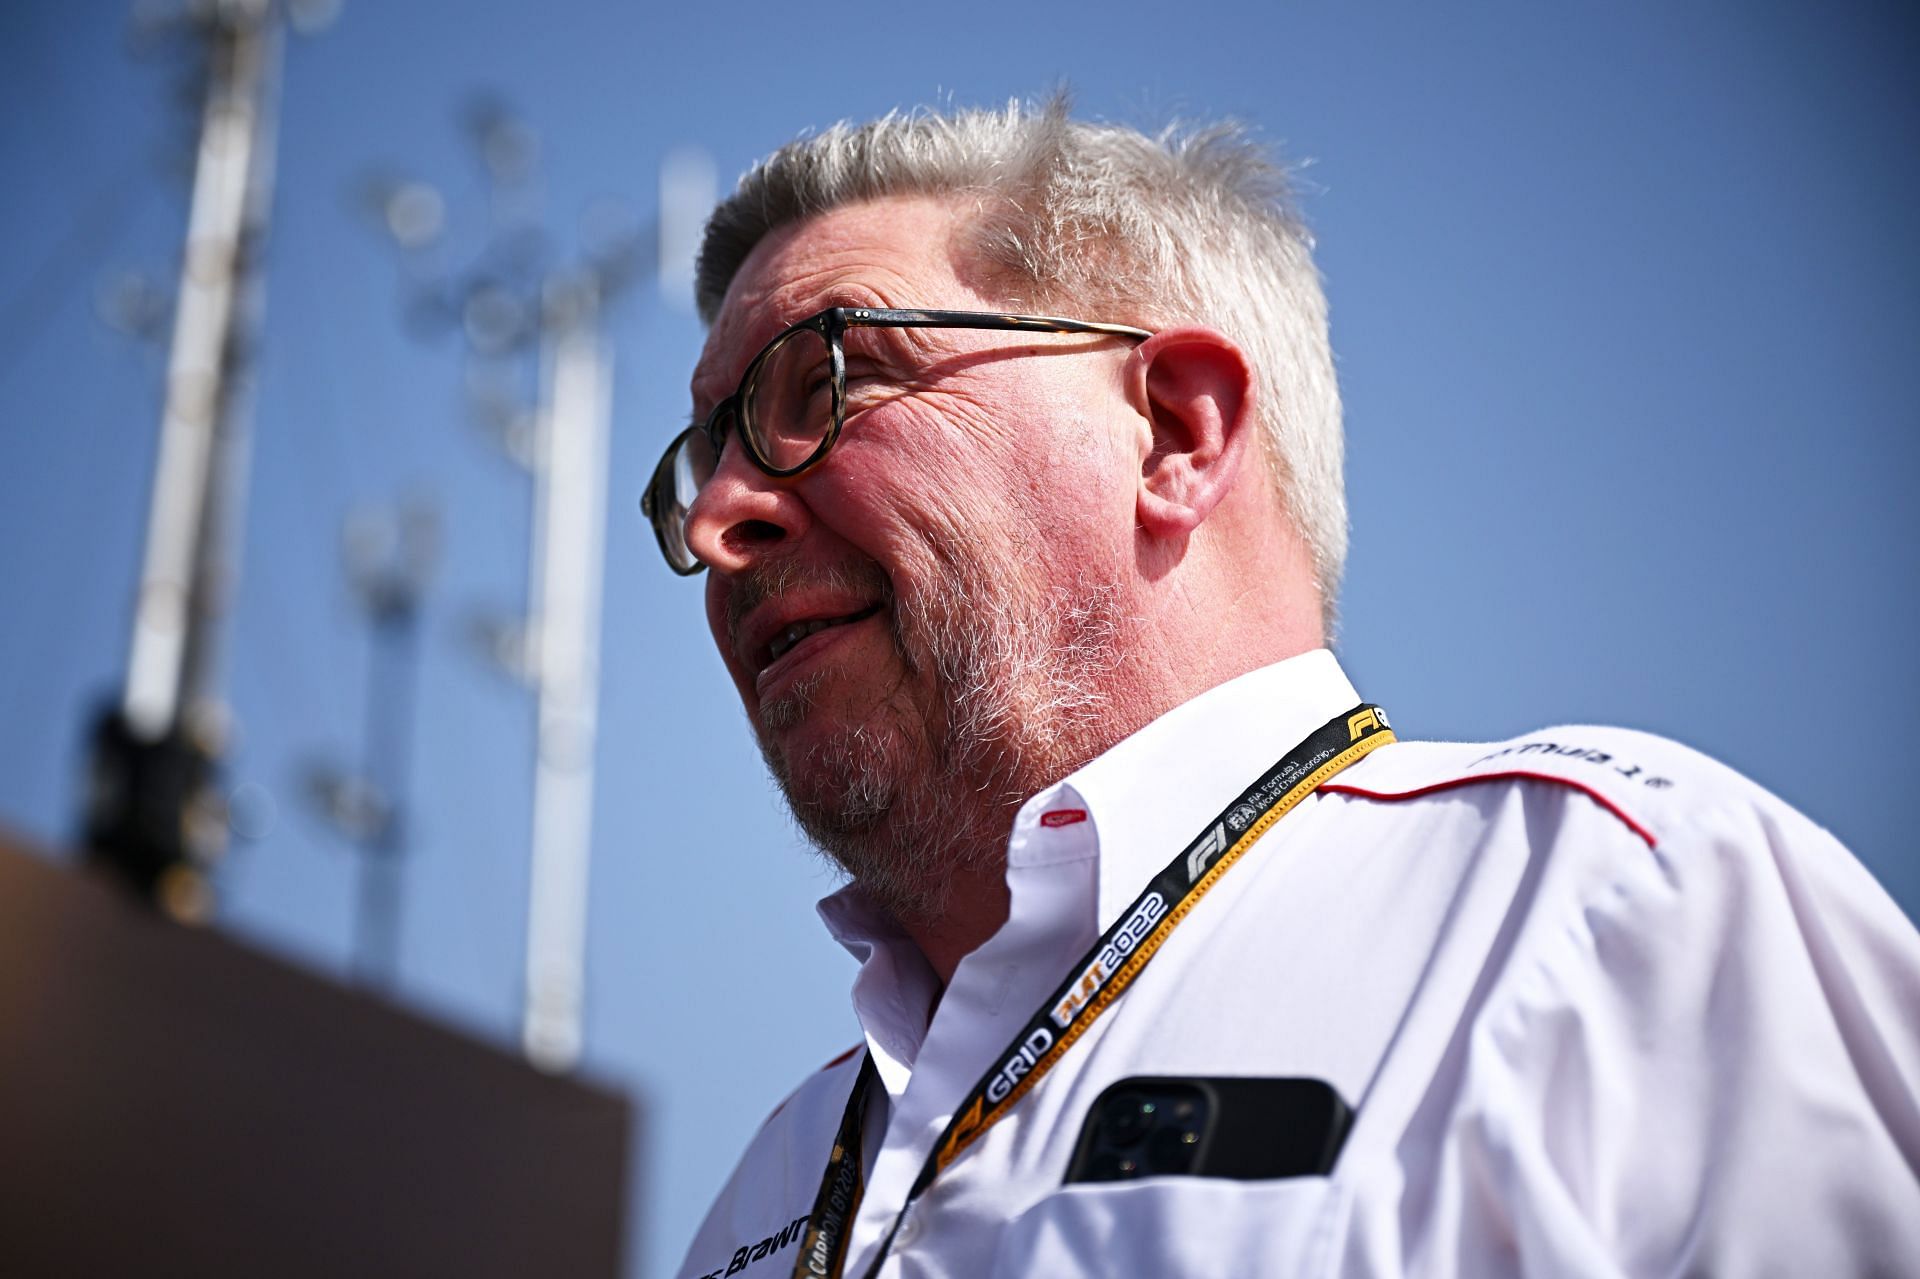 Ross Brawn, Managing Director (Sporting) of the Formula One Group, walks in the Paddock during previews ahead of the F1 Grand Prix of Saudi Arabia at the Jeddah Corniche Circuit on March 24, 2022 (Photo by Clive Mason/Getty Images)